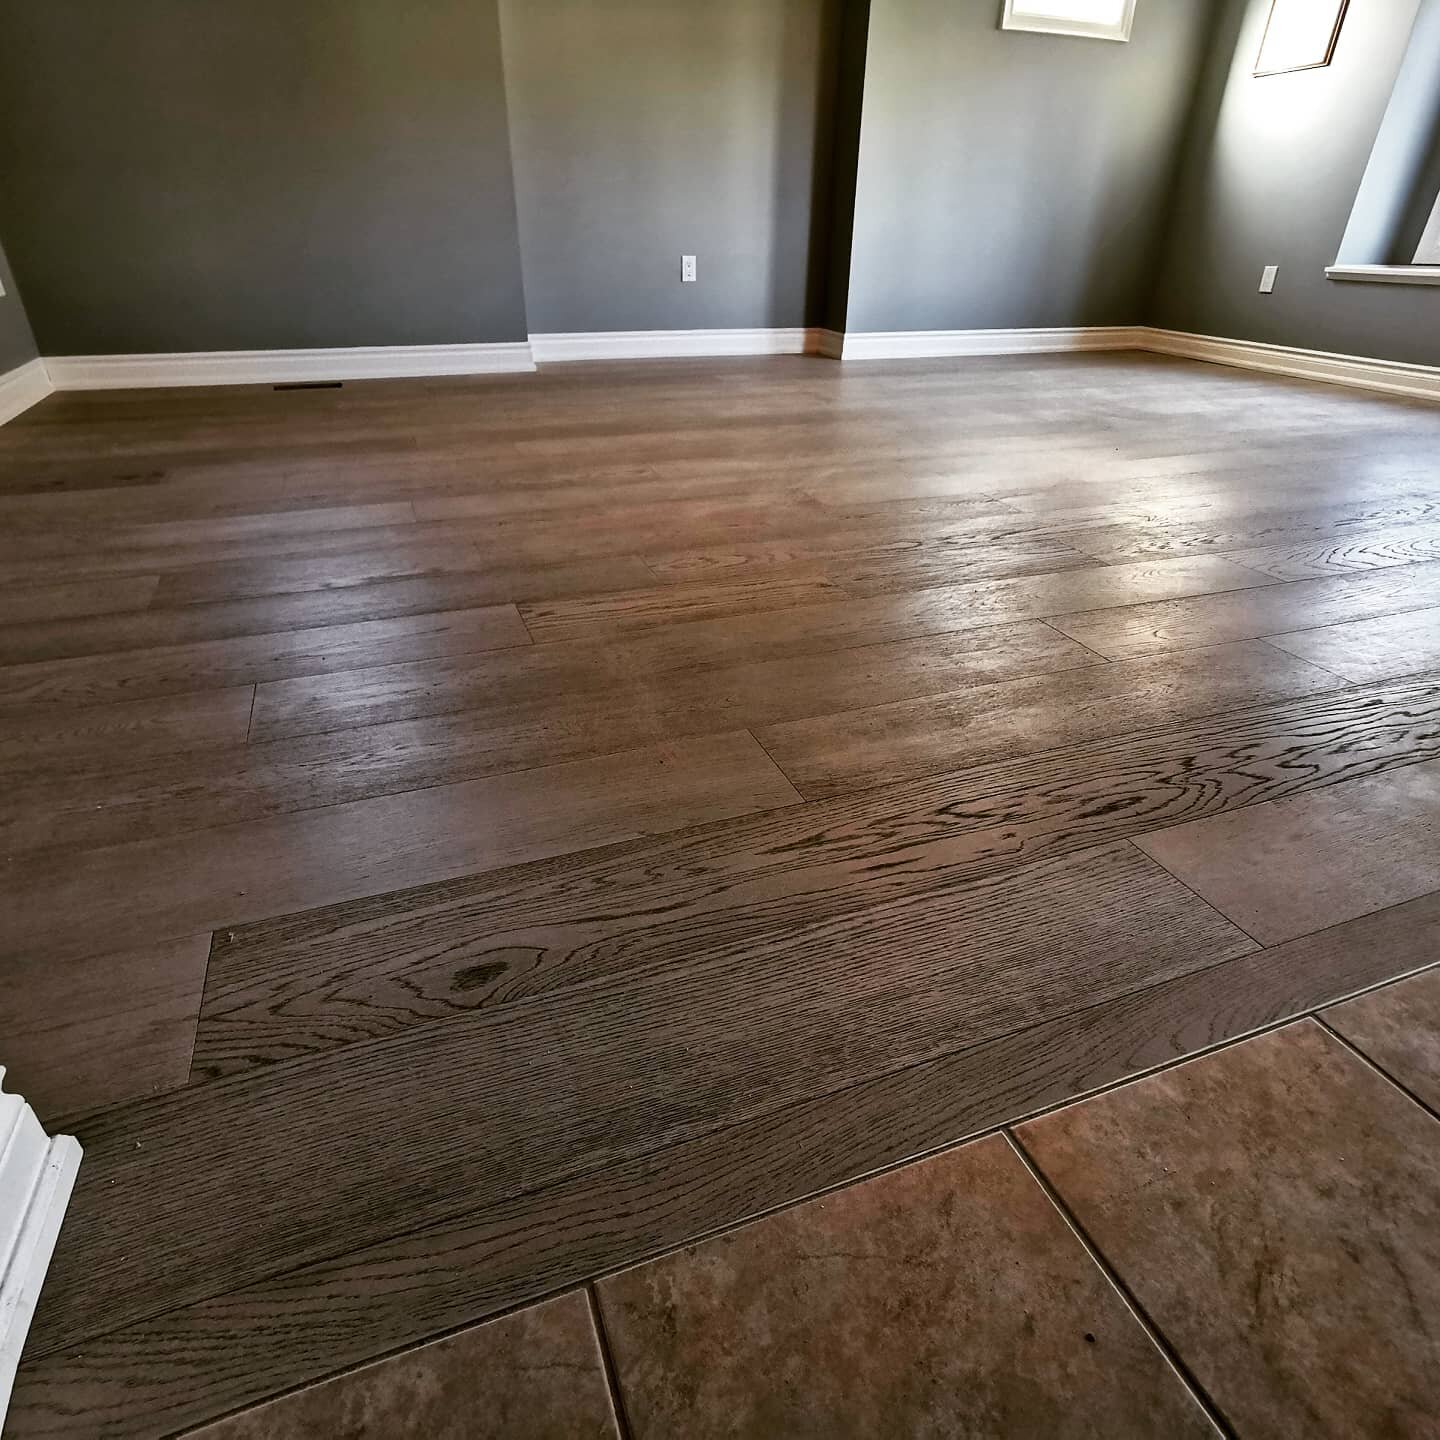 𝗜𝗻 𝘁𝗵𝗲 𝗲𝗻𝗱, 𝗶𝘁'𝘀 𝘄𝗼𝗿𝘁𝗵 𝗶𝘁
.
It's always satisfying looking at the finished product -- and that definitely applies to this engineered hardwood job we recently completed.
.
Kicking around the idea of replacing your floors? Give us a c